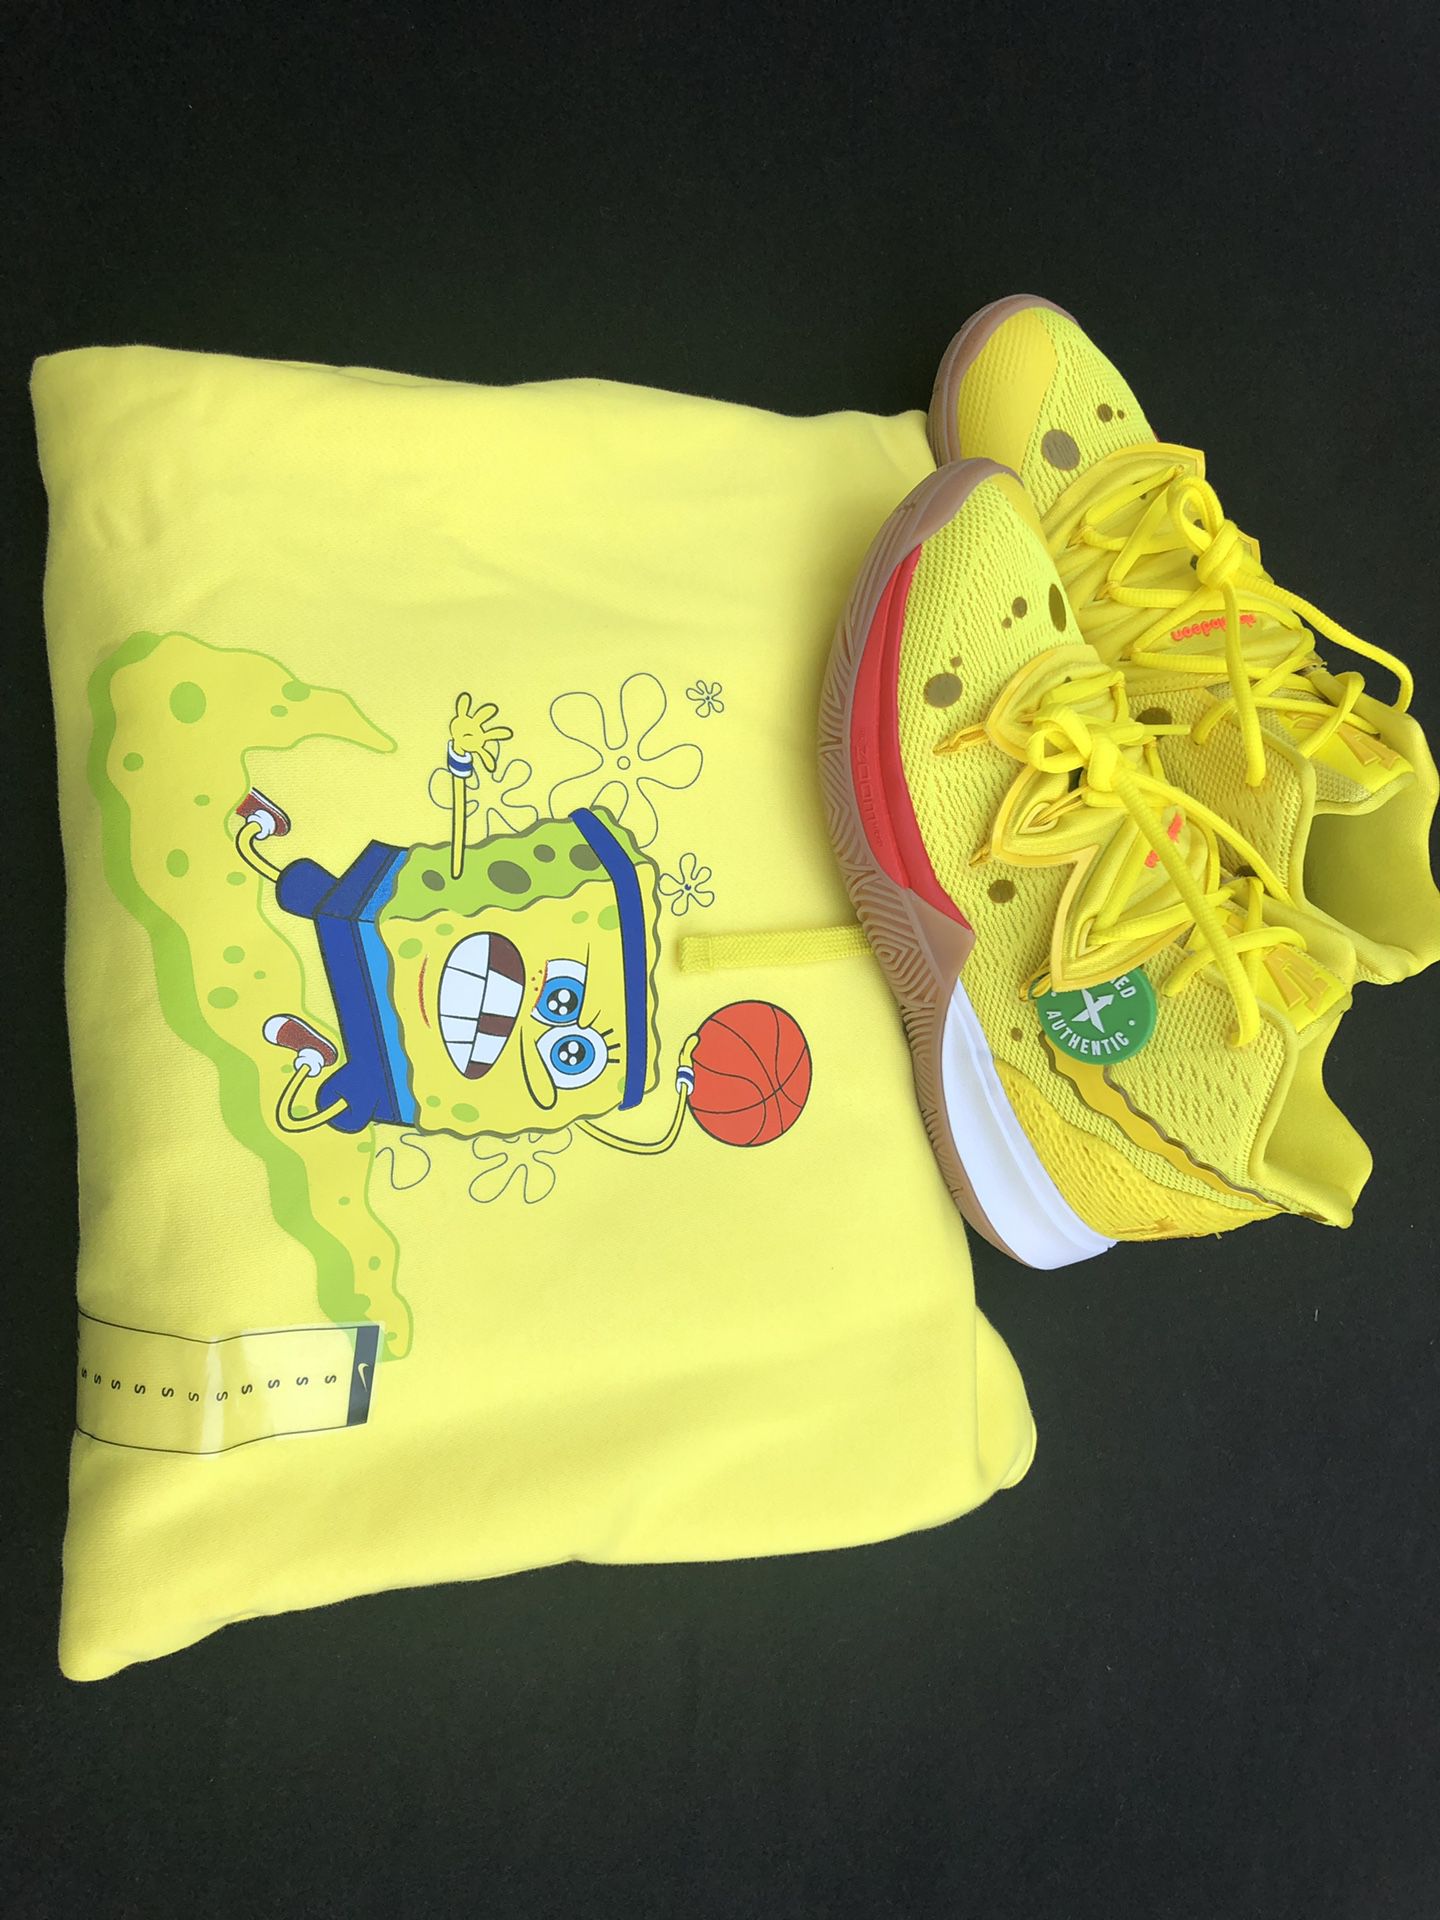 New Nike Kyrie 5 Spongebob Shoes Size 8/ Pullover Hoodie Yellow Size S, In Hand!